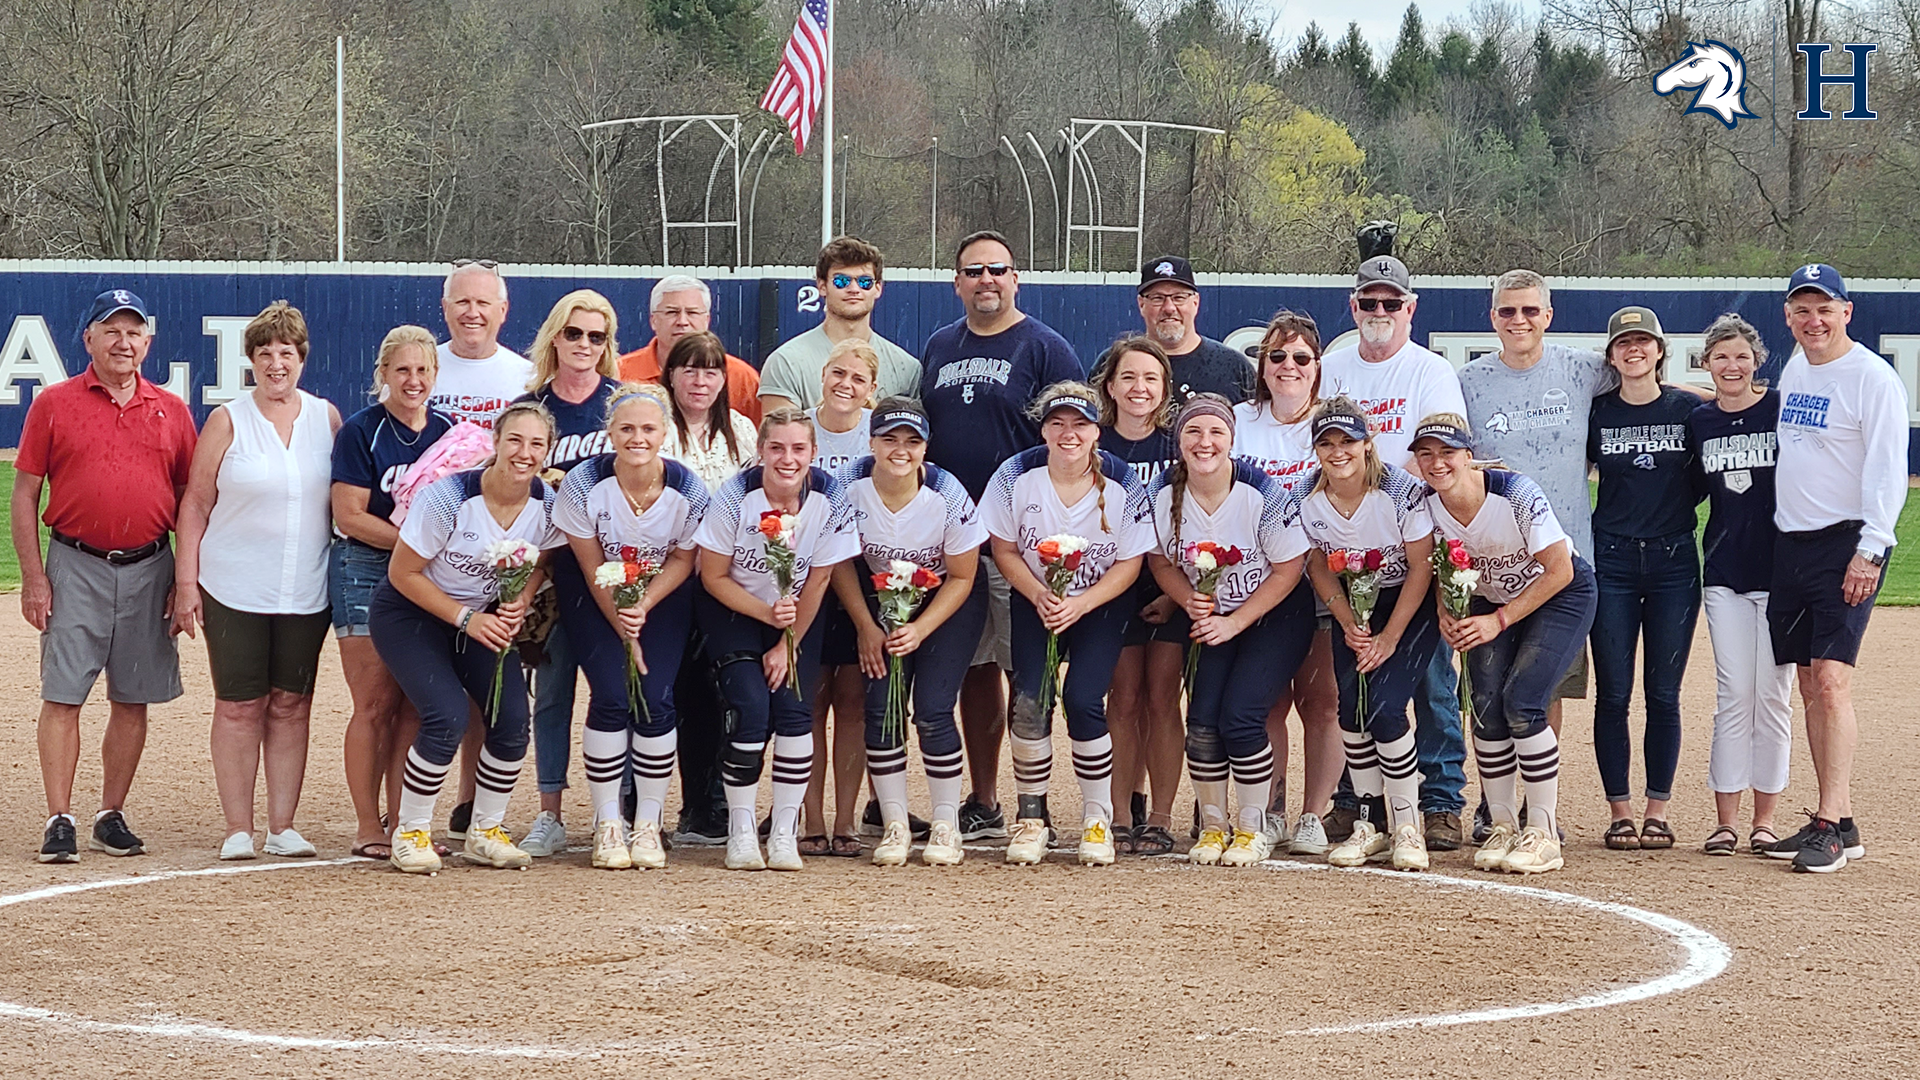 Chargers sweep Ursuline on Senior Day; set up showdown weekend for G-MAC title